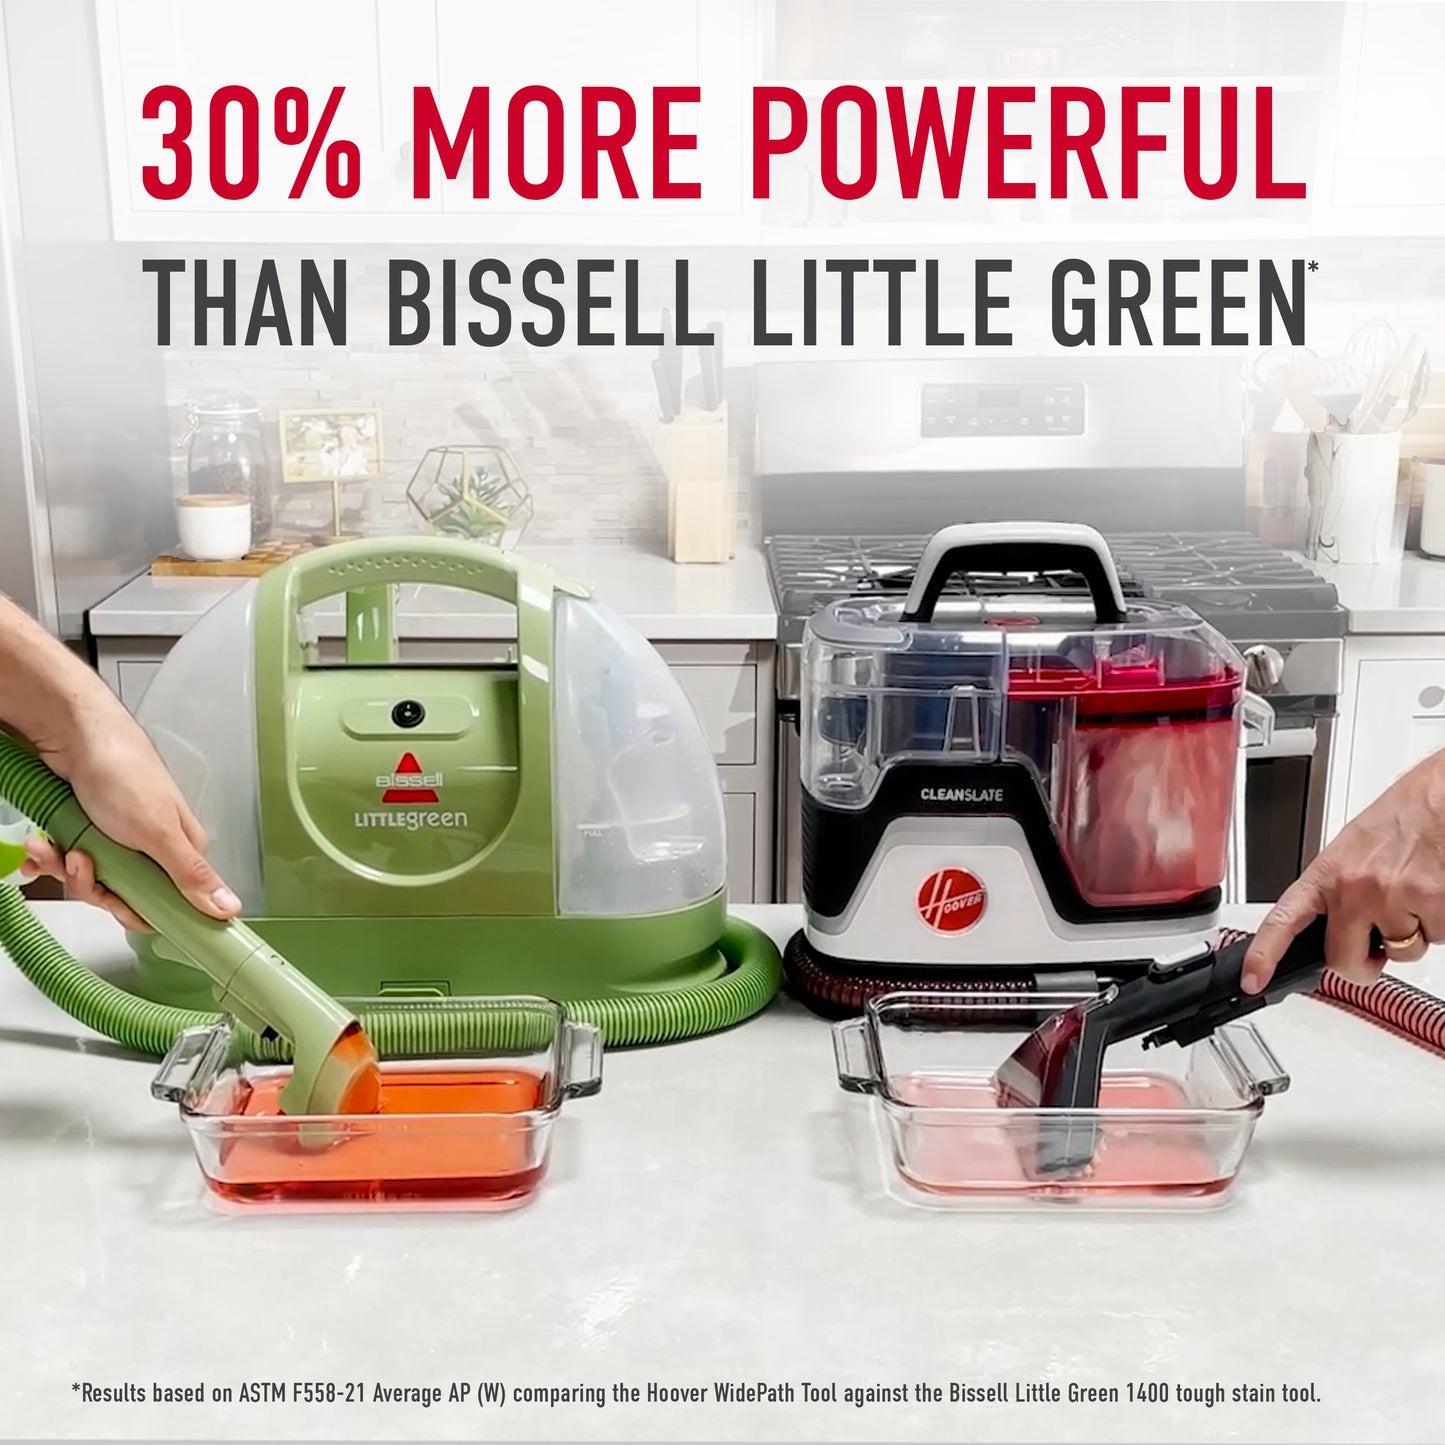 Side by side comparison of Hoover cleanslate pet and bissell little green, showing their suction power and highlighting that cleanslate pet is 30% more powerful than Bissell little green